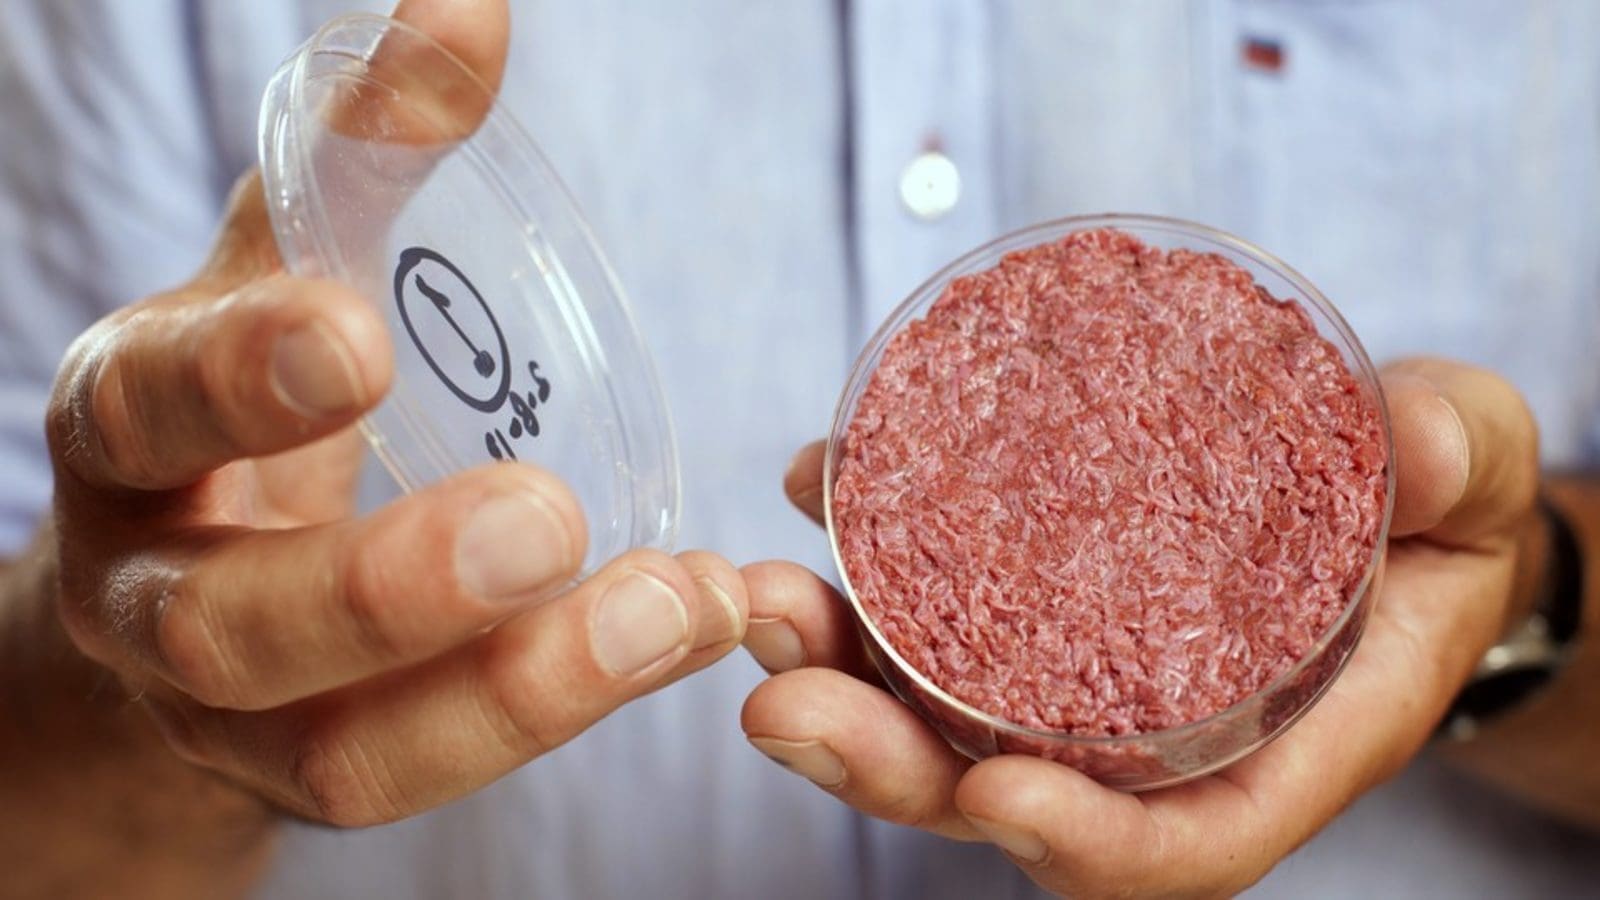 A win for lab-grown meat sector as survey finds UK consumers open to taking a bite